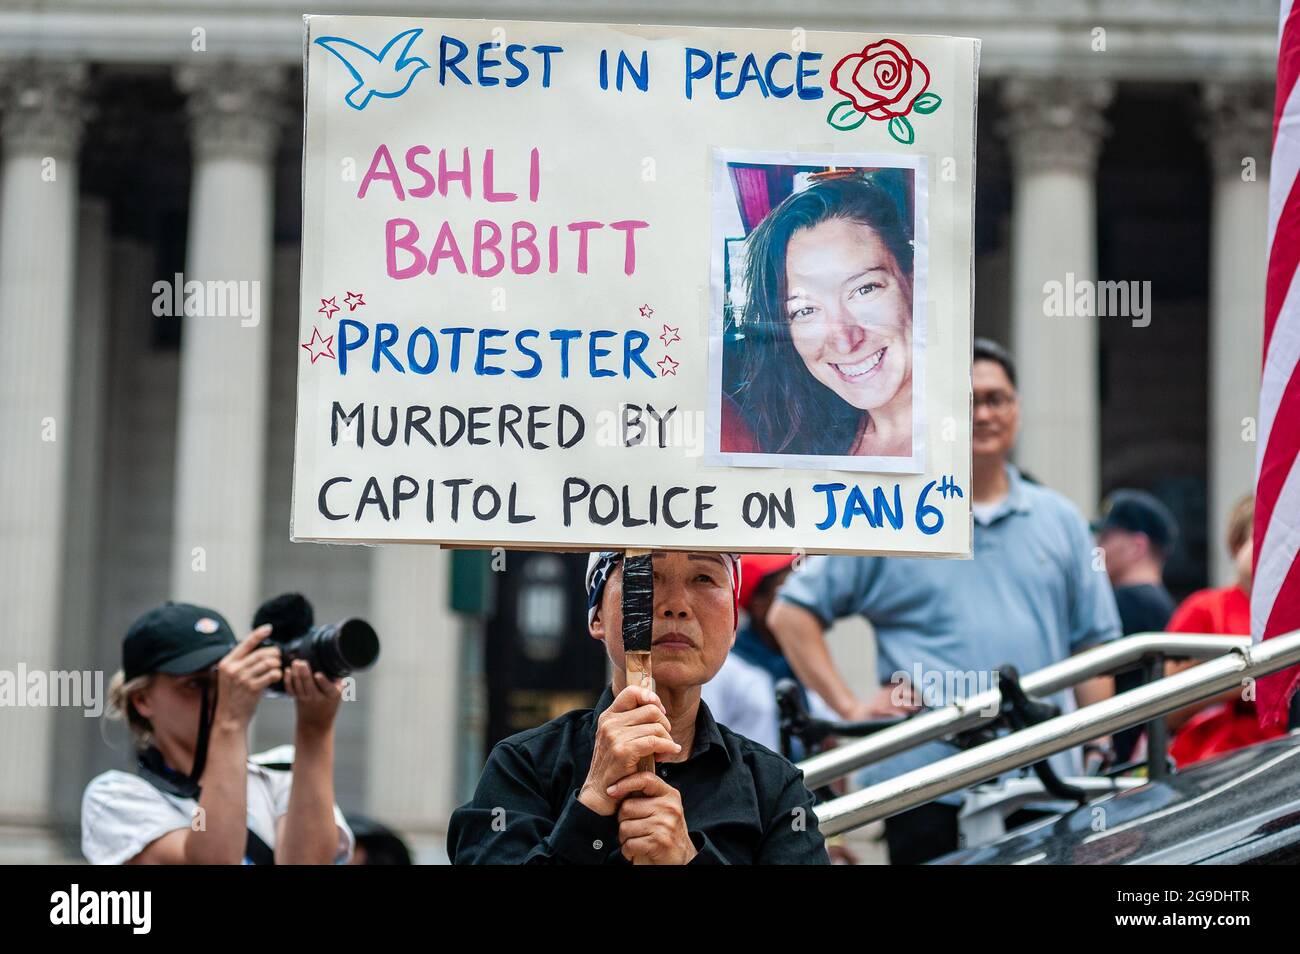 A woman holds a sign with the image of Ashli Babbitt, who was shot by police while storming the U.S. Capitol, at a far right rally in Foley Square in New York City on July 25, 2021. The rally, organized by C.A.P.P., called for the release of rioters, who were arrested after storming the U.S. Capitol on January 6, 2021. (Photo by Gabriele Holtermann/Sipa USA) Credit: Sipa USA/Alamy Live News Stock Photo